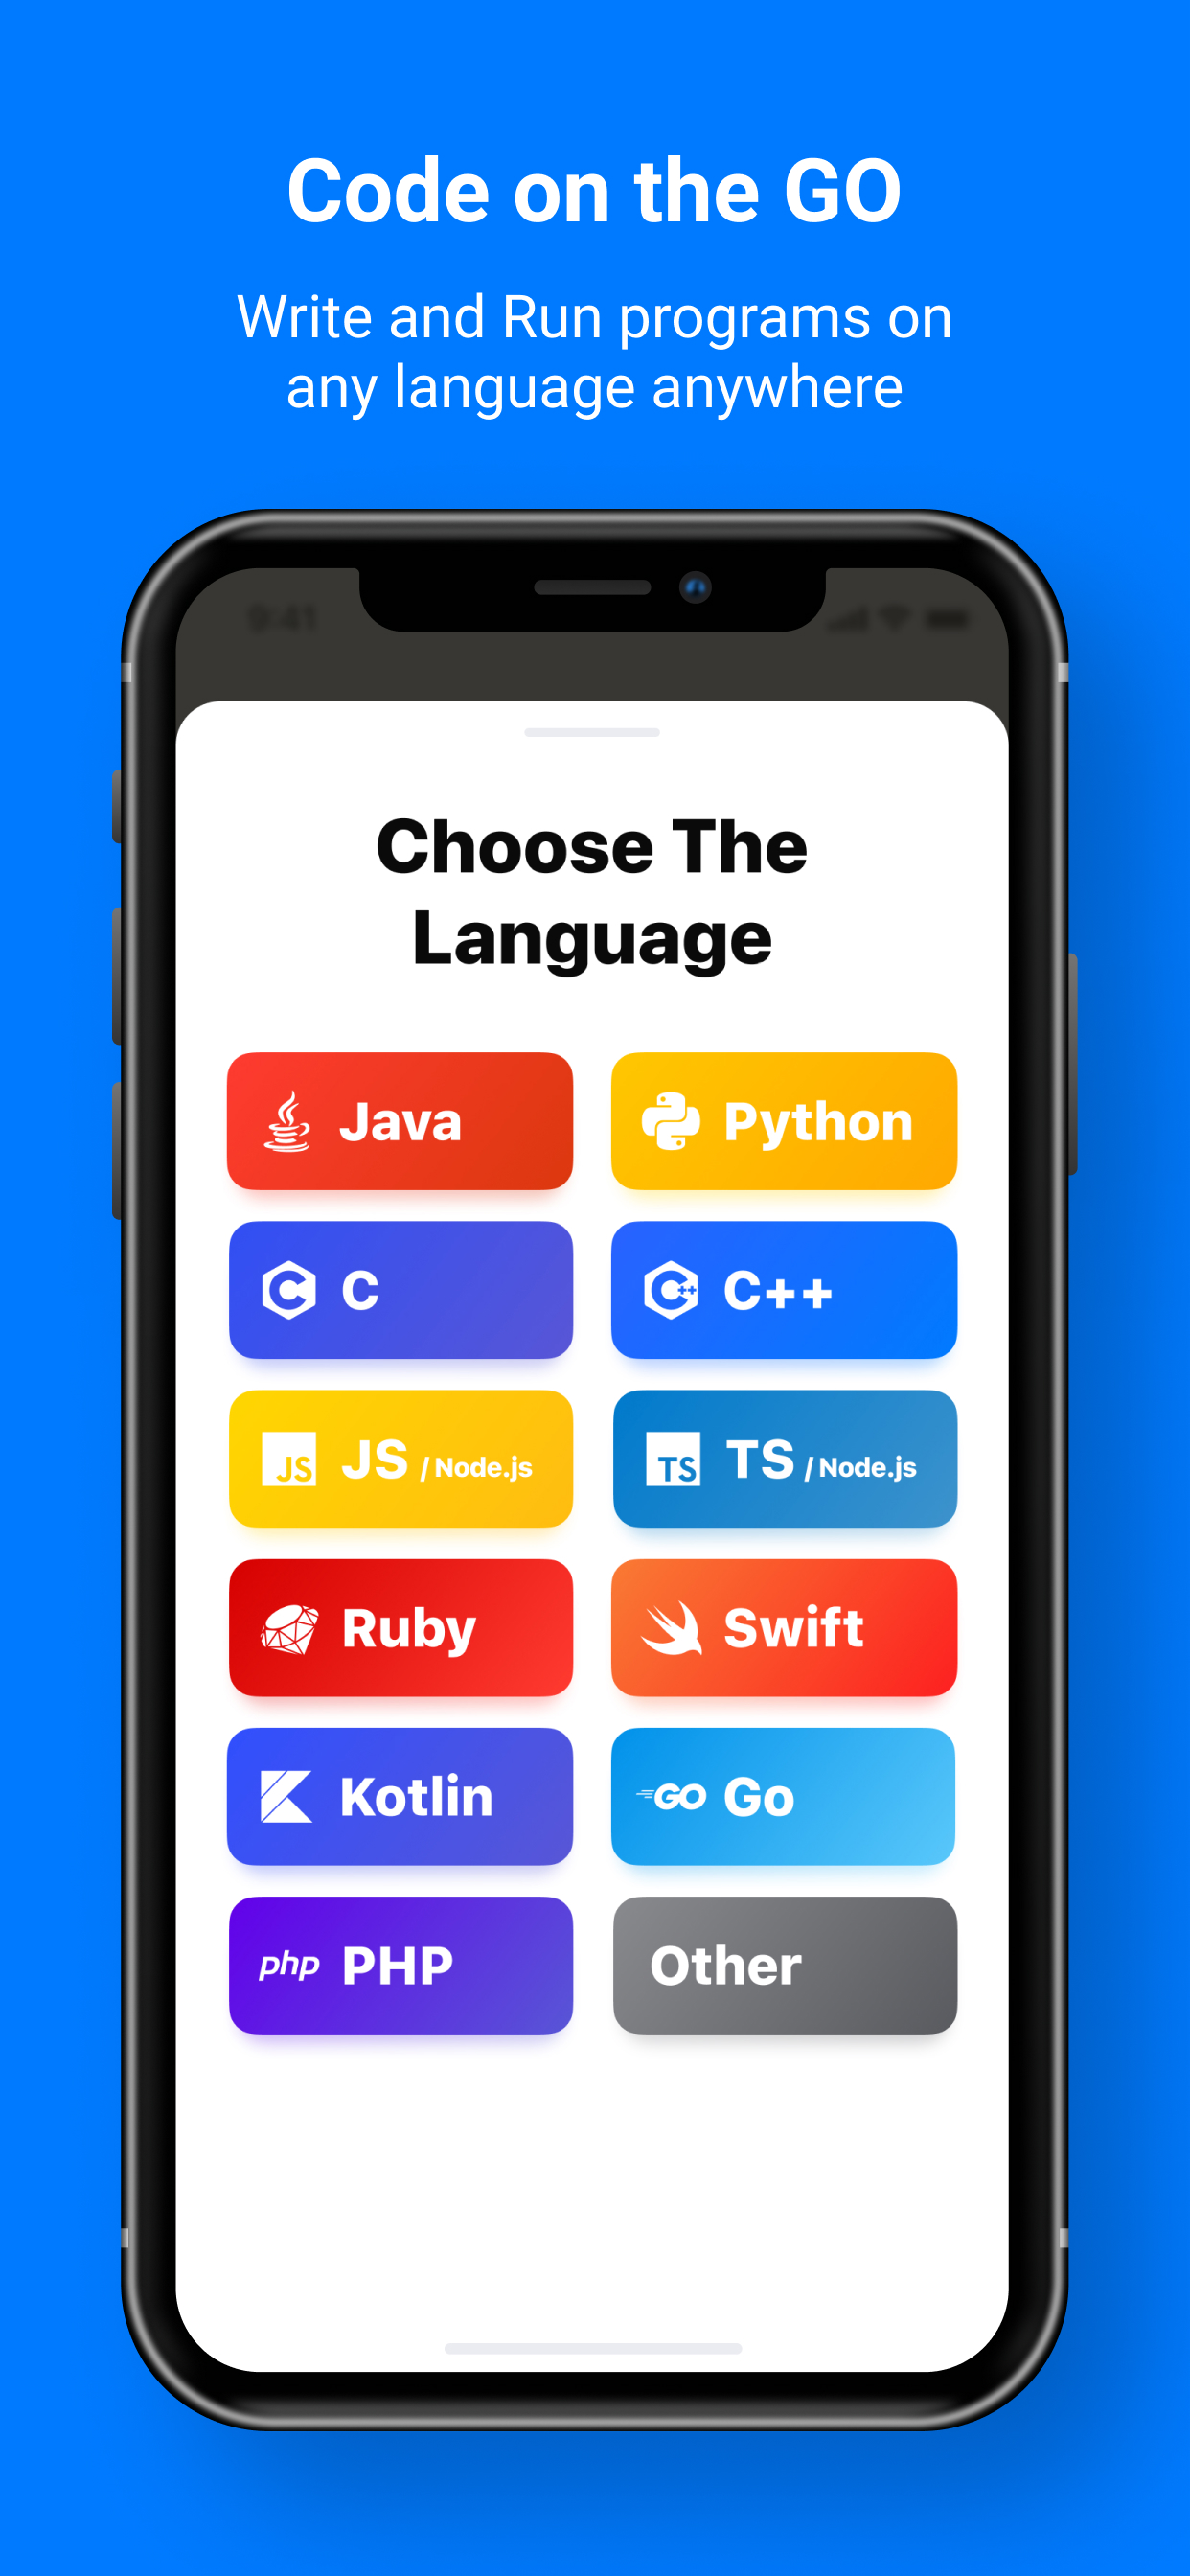 Code on the go. Write and Run programs on any language anywhere!